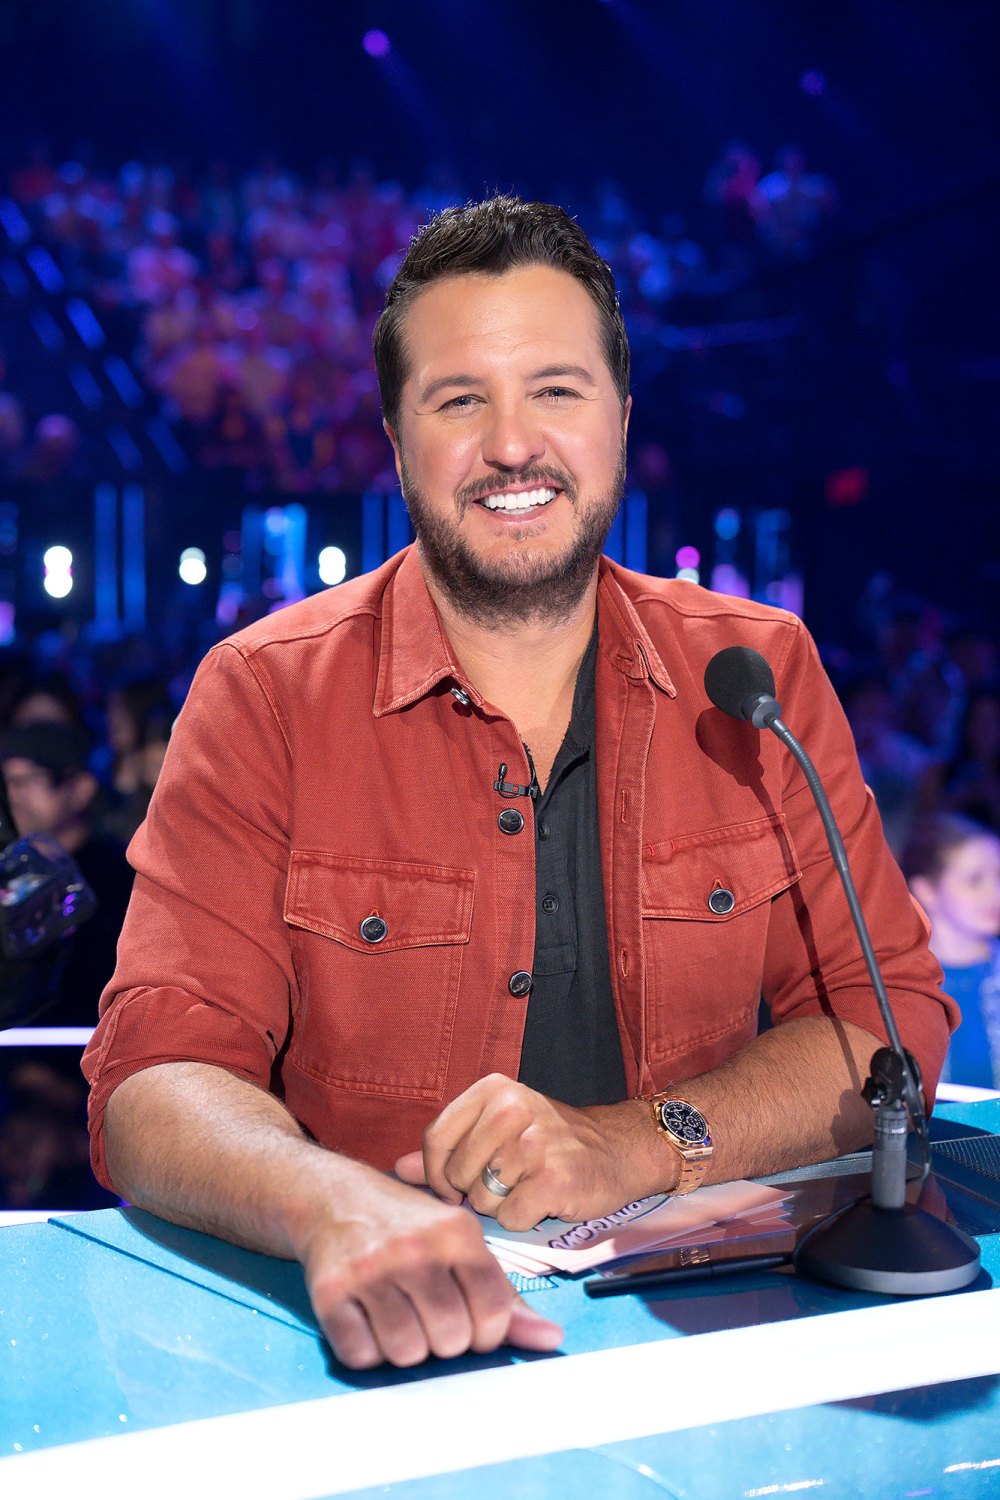 Luke Bryan was asked on American Idol about his concert going down